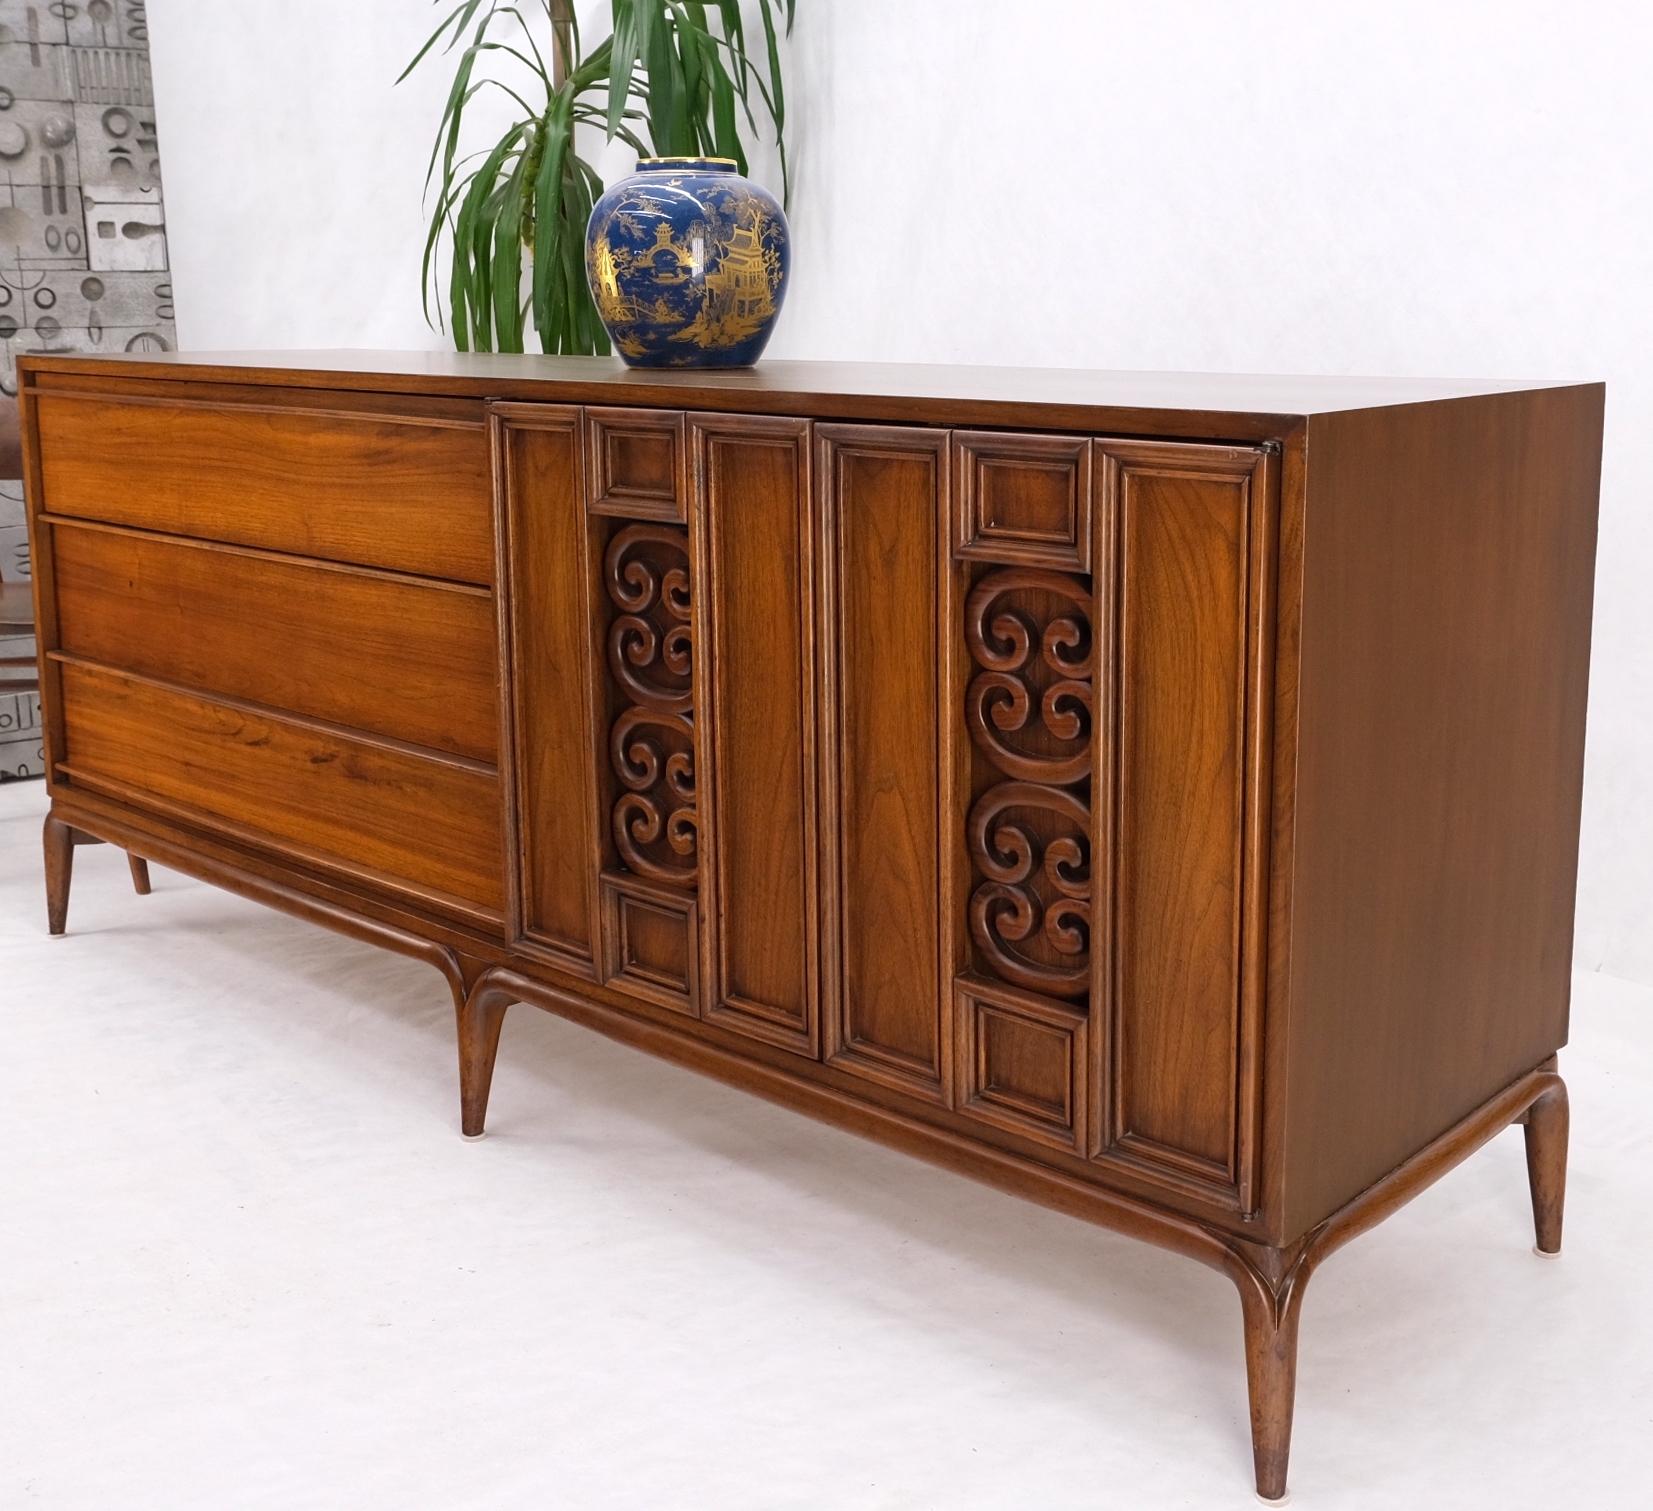 Danish Mid-Century Walnut 6 Drawers Long Credenza Dresser w/ Carved Double Doors For Sale 4